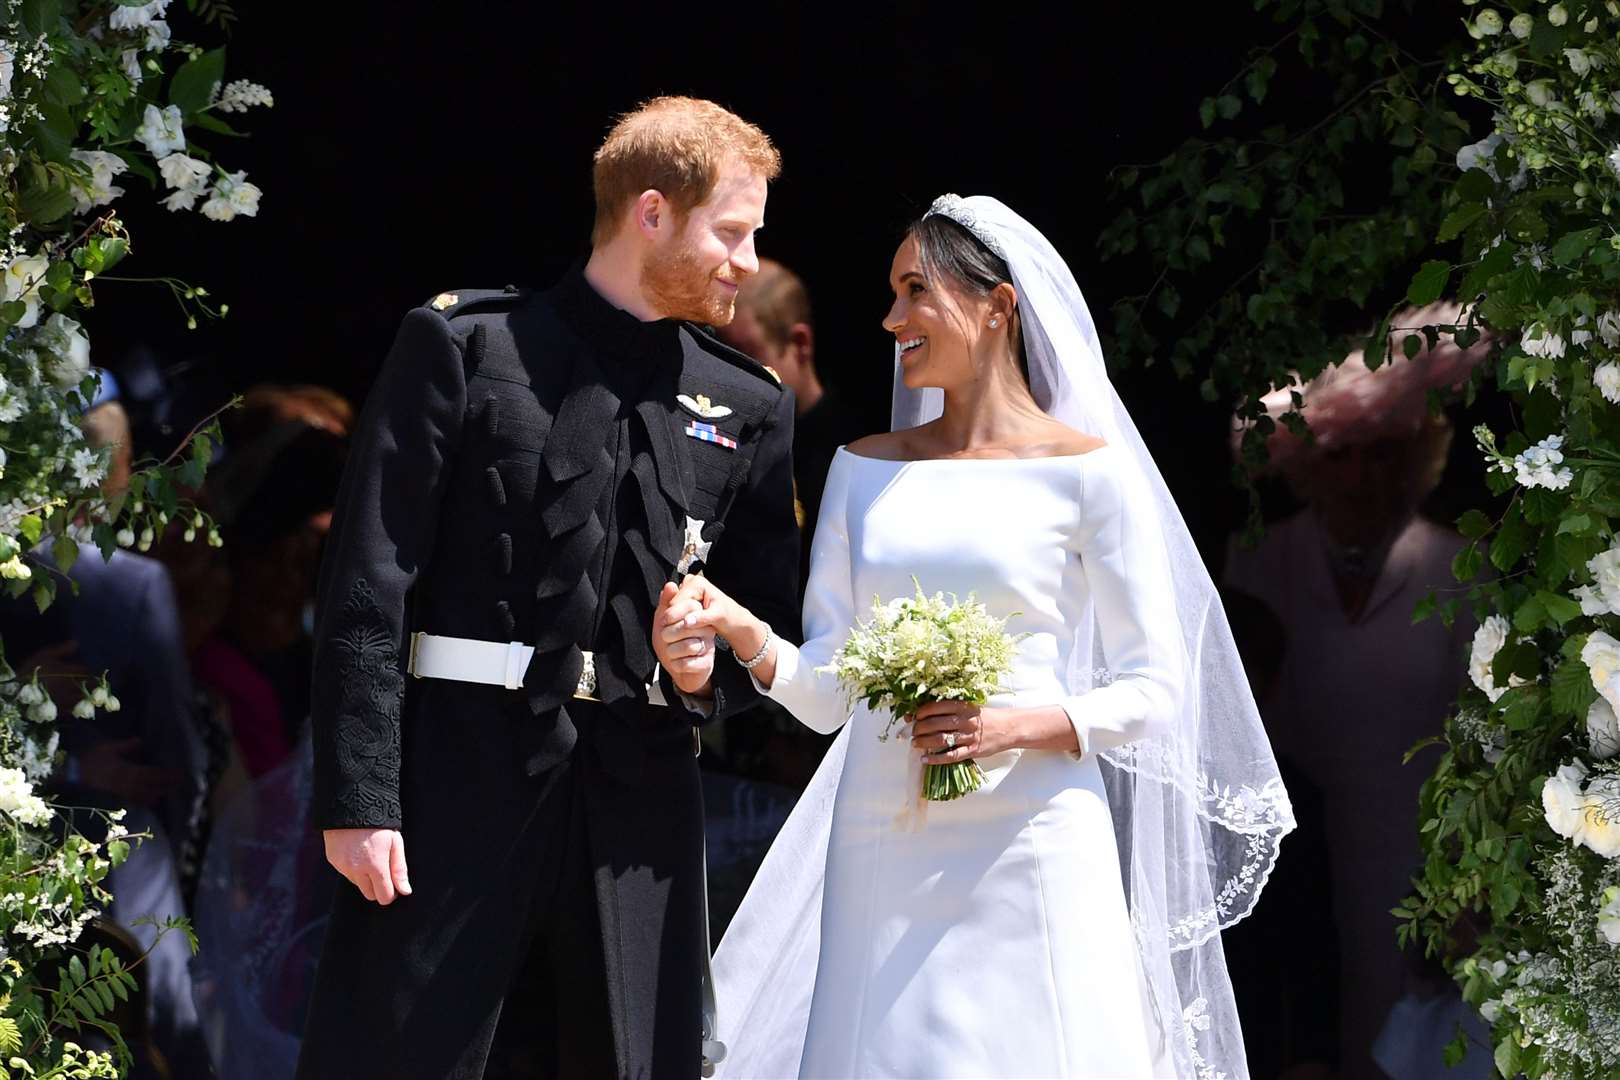 Andrew Marr expressed his sadness at the Duke and Duchess of Sussex’s decision to step down as working royals (Ben Stansall/PA)